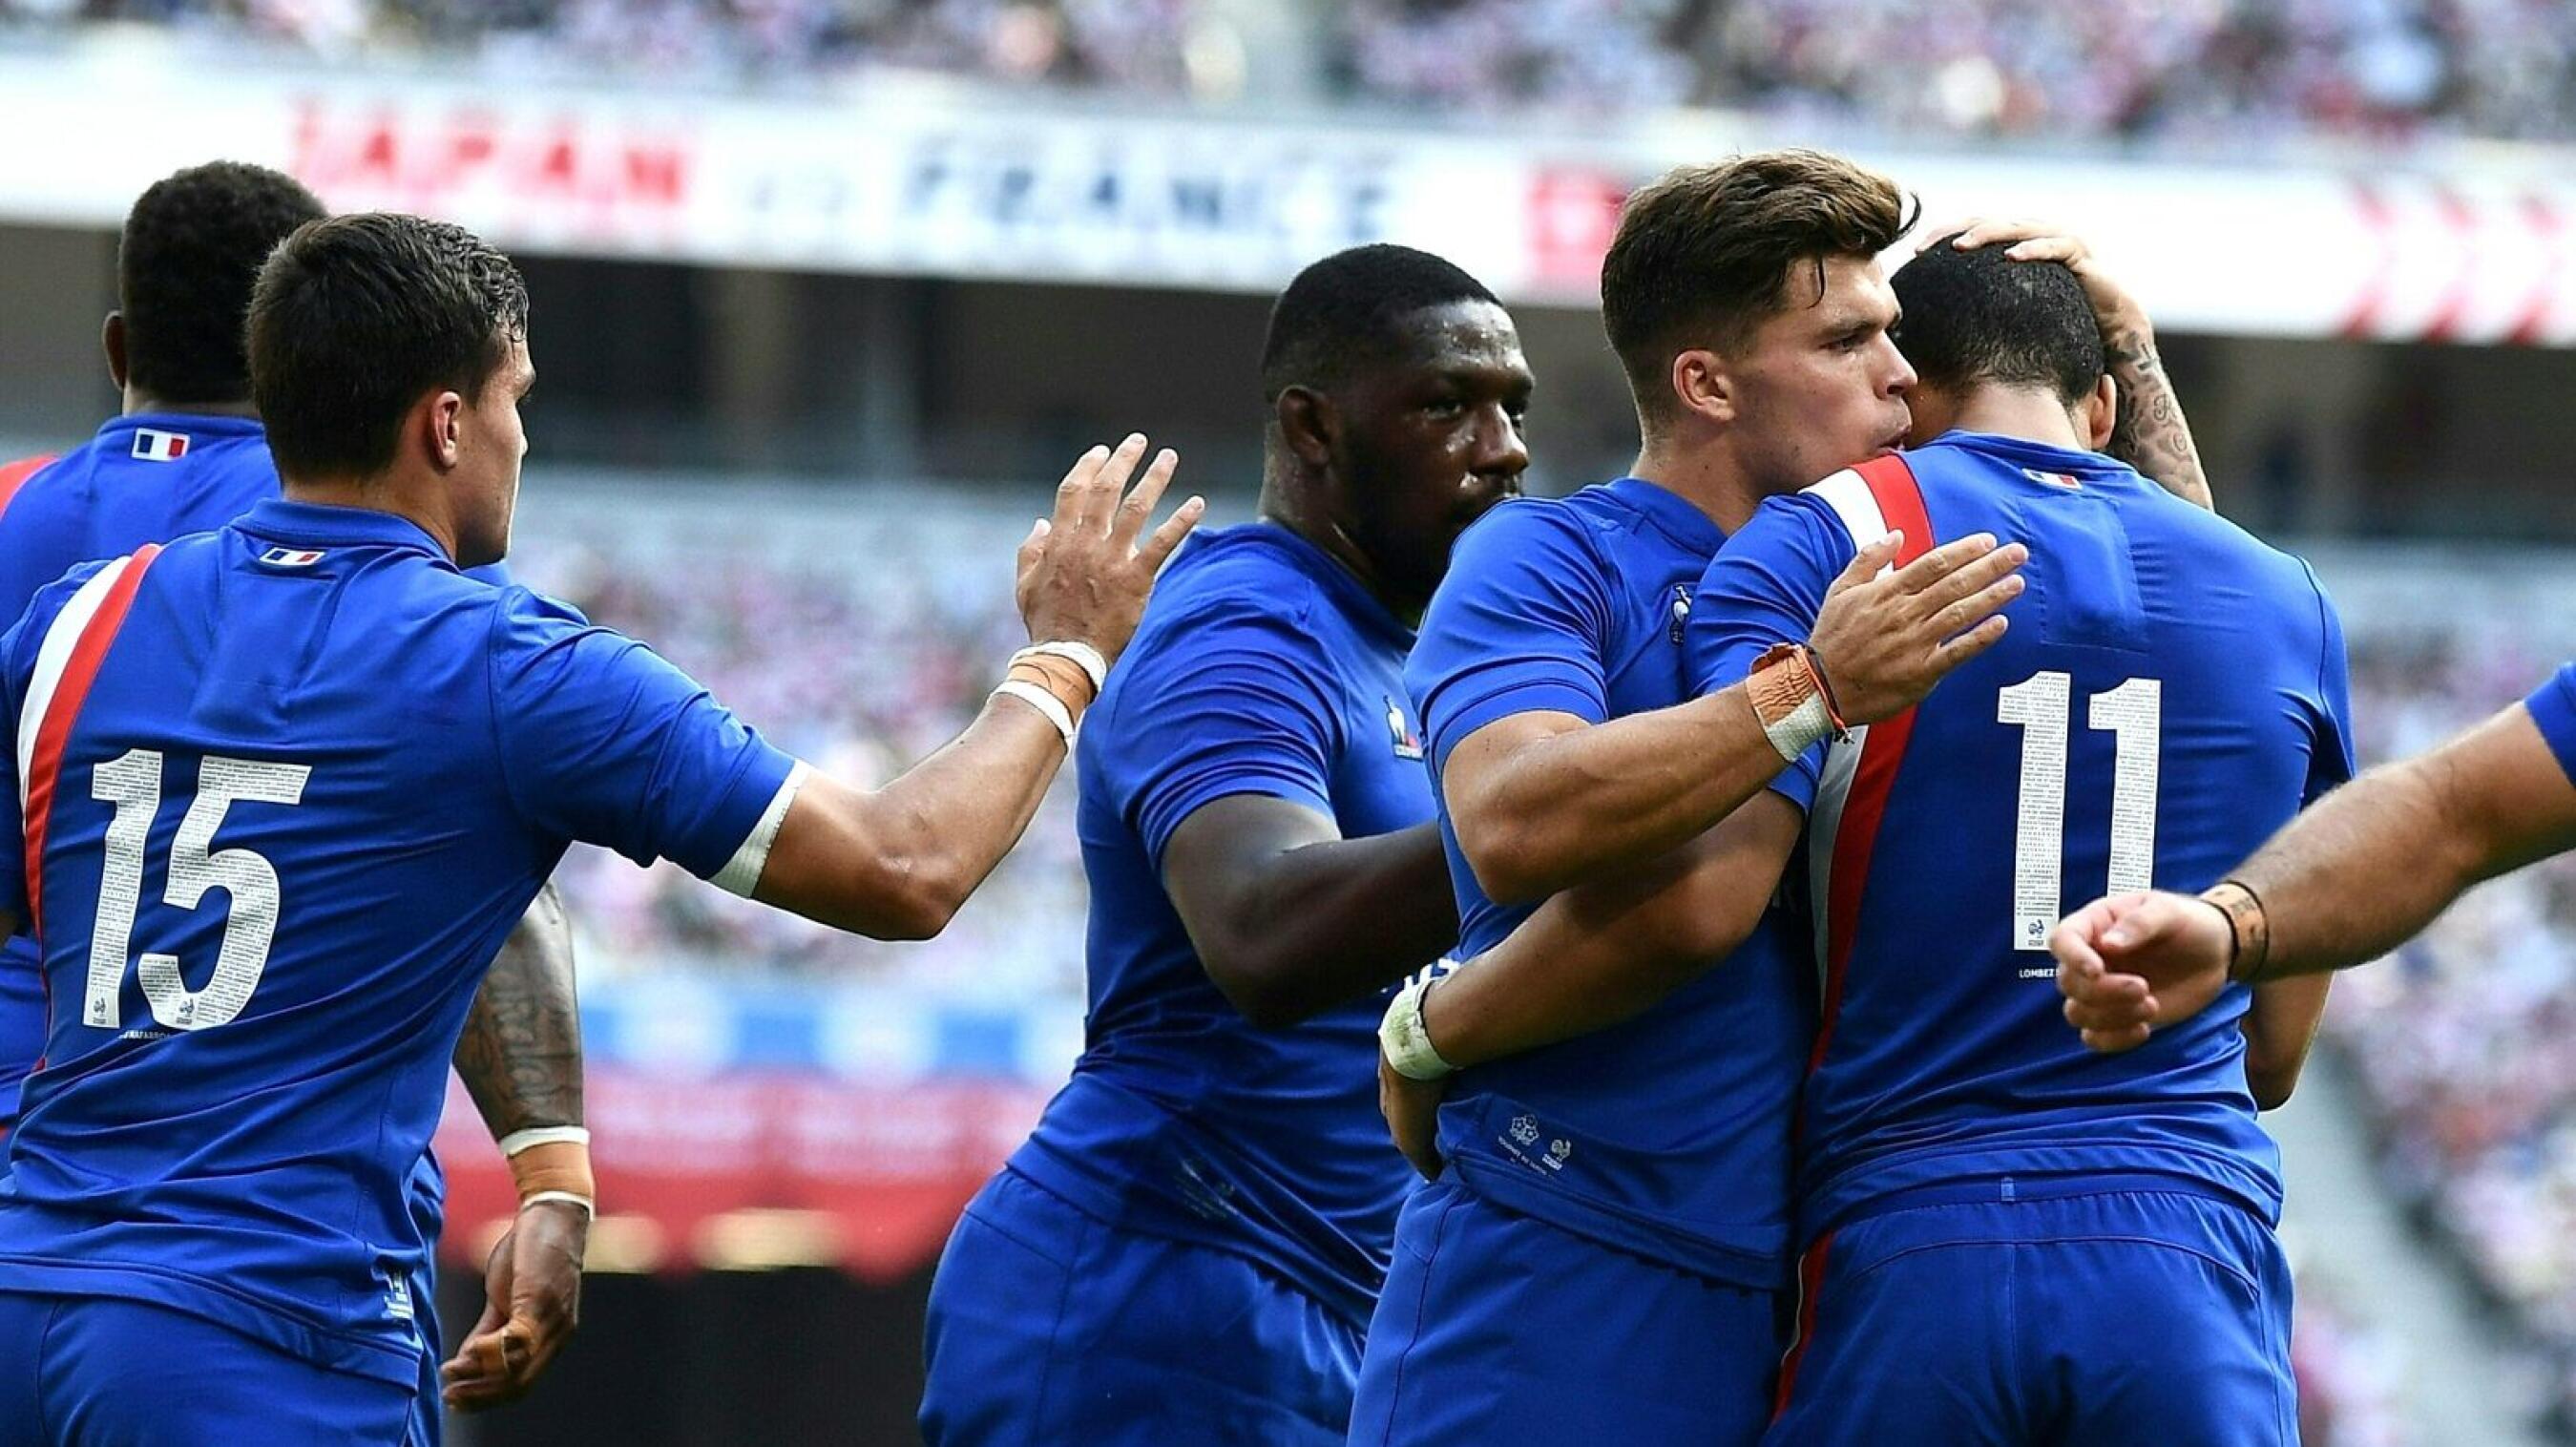 France's Matthis Lebel celebrates with teammates after scoring a try during their second Test match against Japan at the National Stadium in Tokyo on Saturday